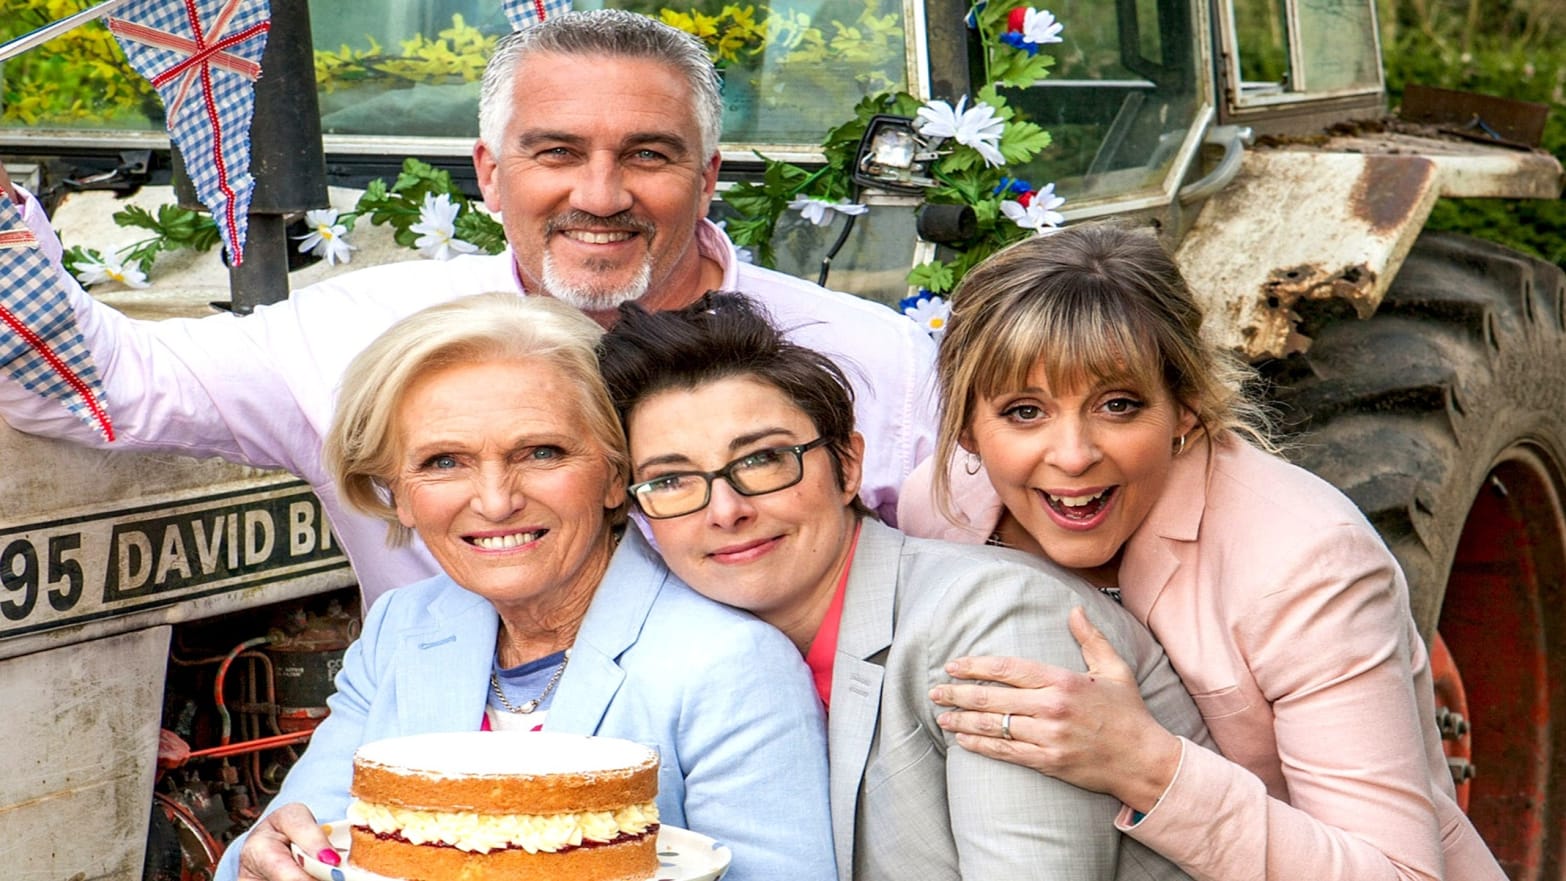 An Ode to The Great British Baking Show, TVs Greatest Cooking Competition pic